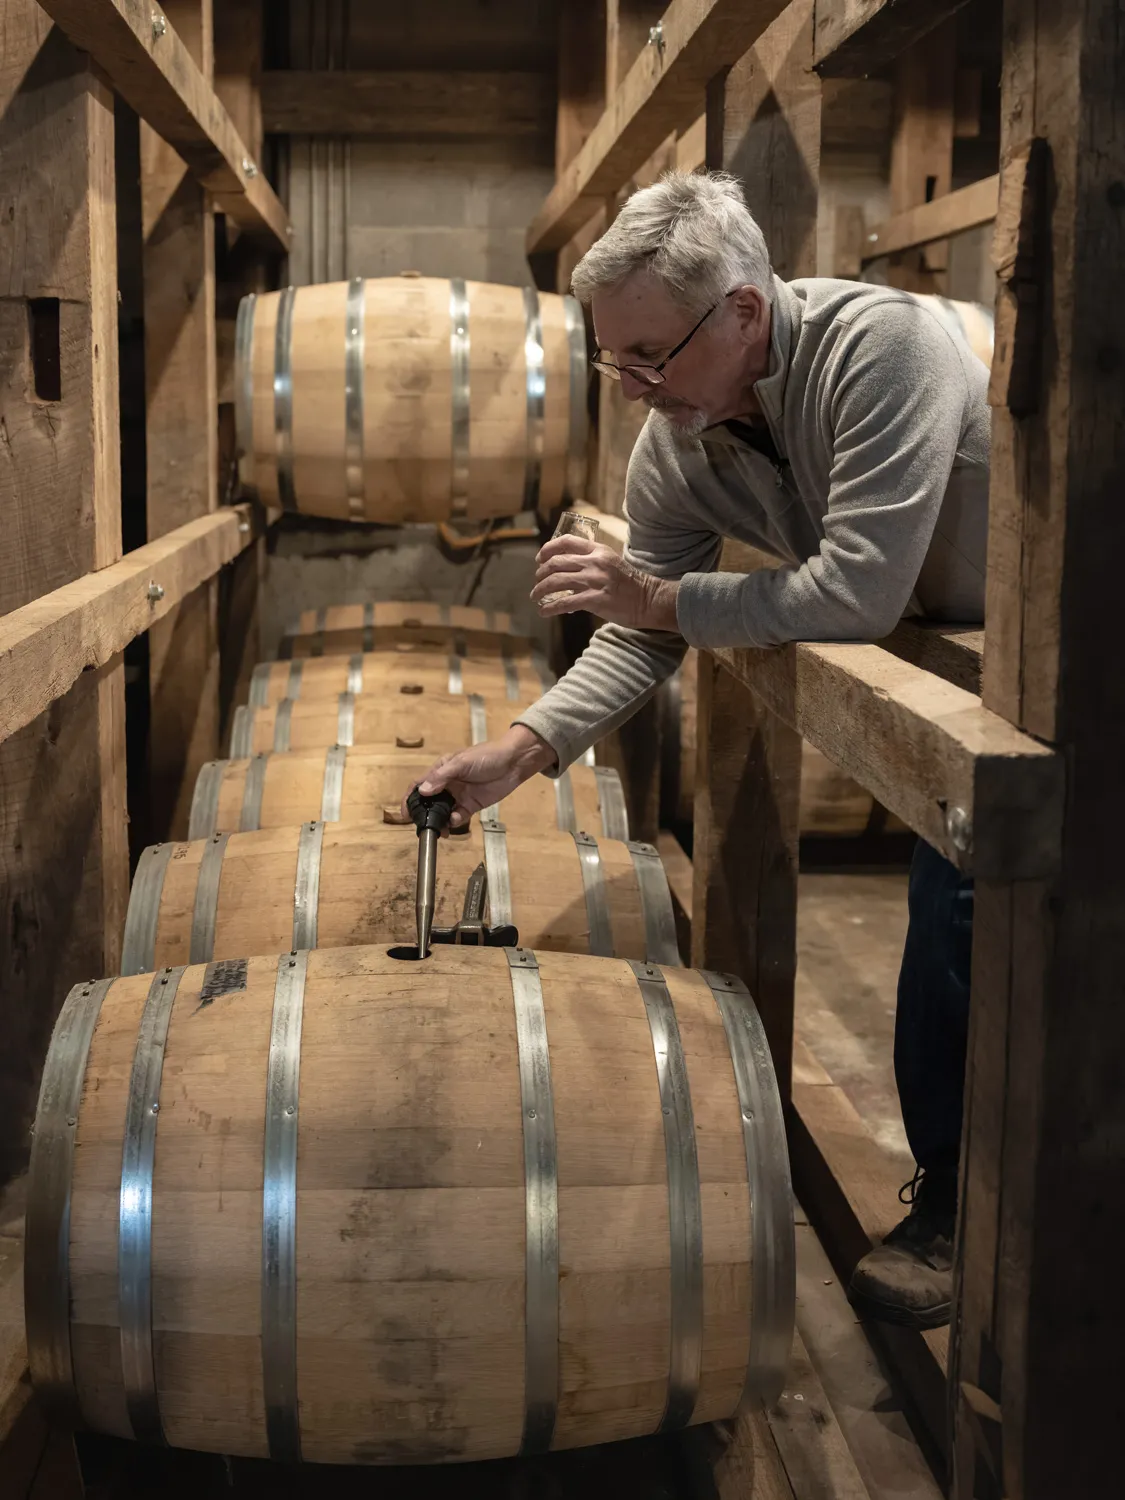 Doug Morgan leans over a beam into an area where a line of whisky barrels lie on their sides. In one hand he holds a small glass cup; in the other, a pipette sized like a turkey baster to draw a sample of the alcohol. 